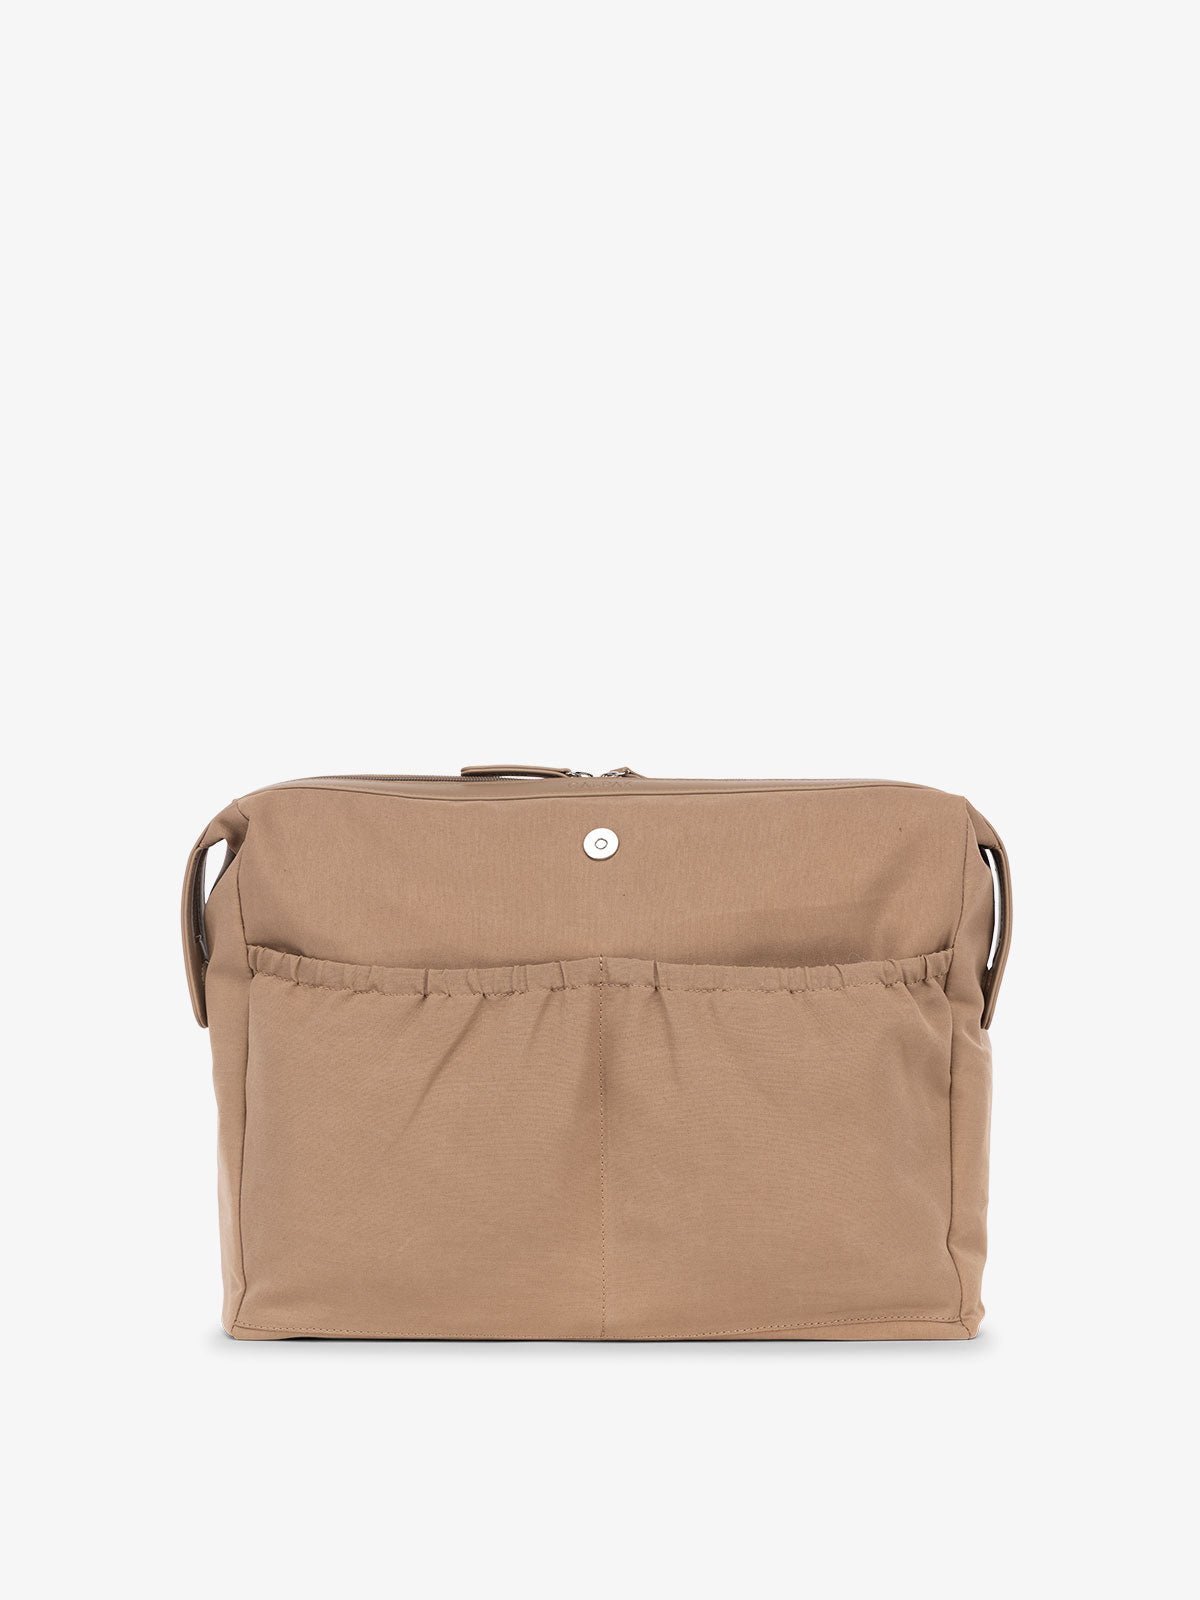 CALPAK Haven laptop tote bag with removeable laptop sleeve in taupe brown